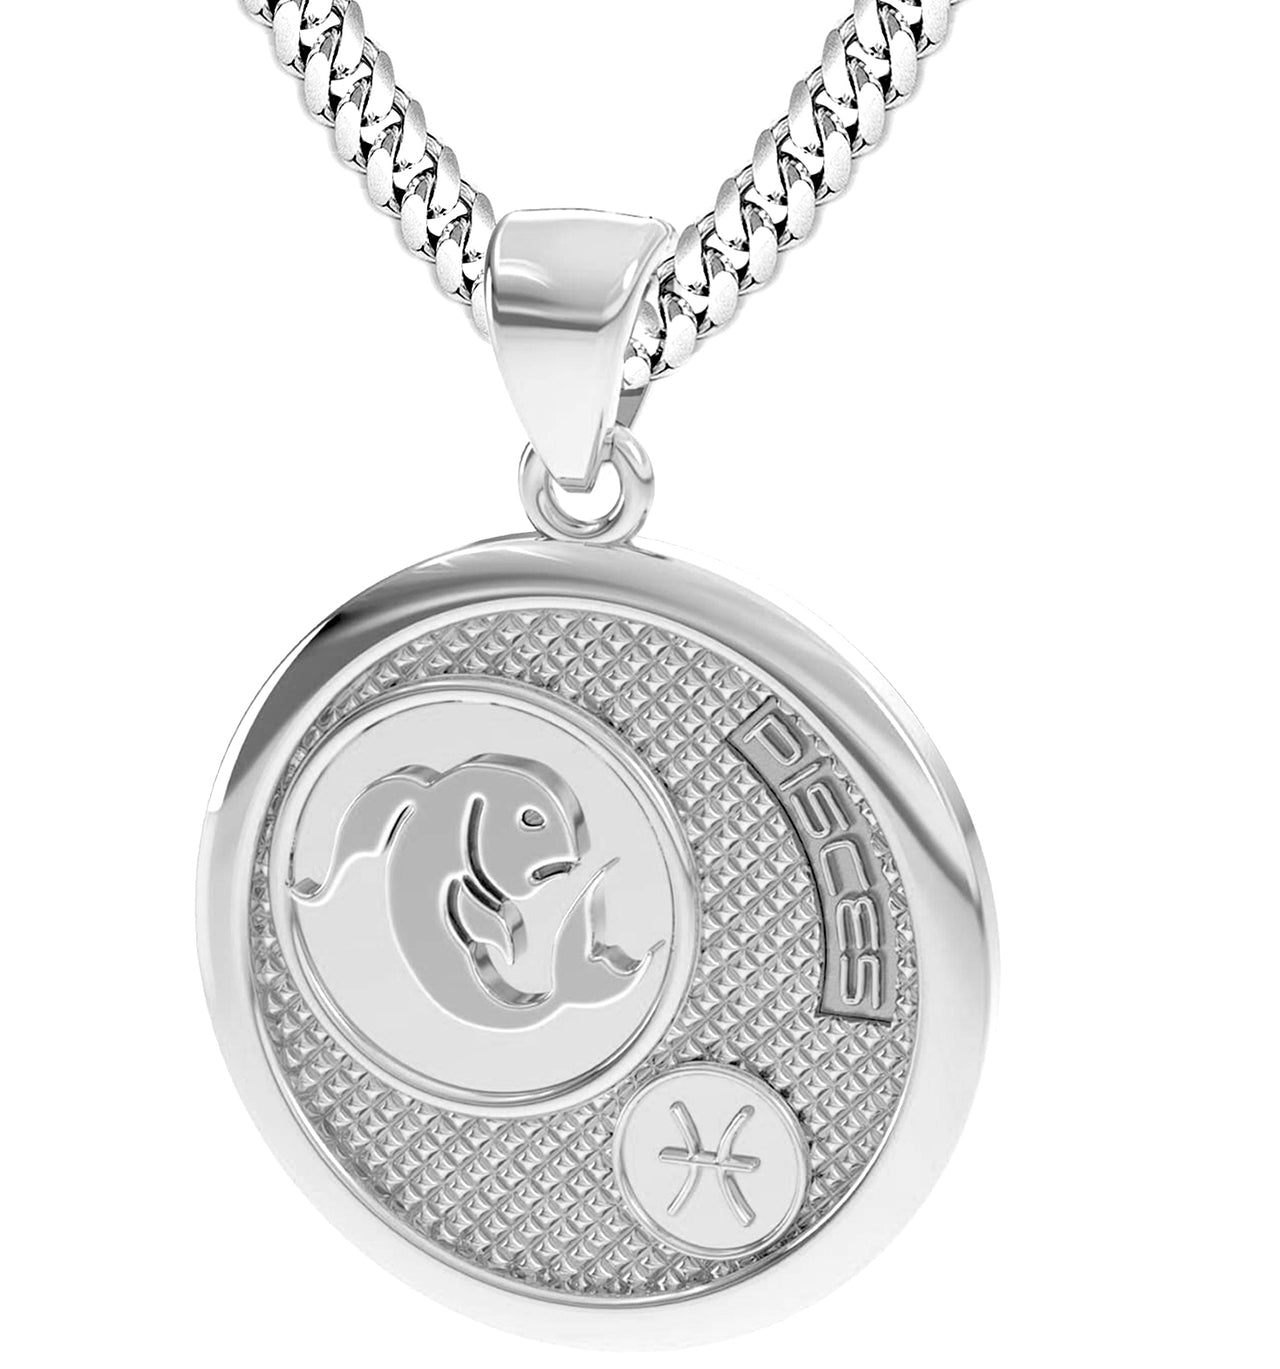 Men's 925 Sterling Silver Round Pisces Zodiac Polished Finish Pendant Necklace, 33mm